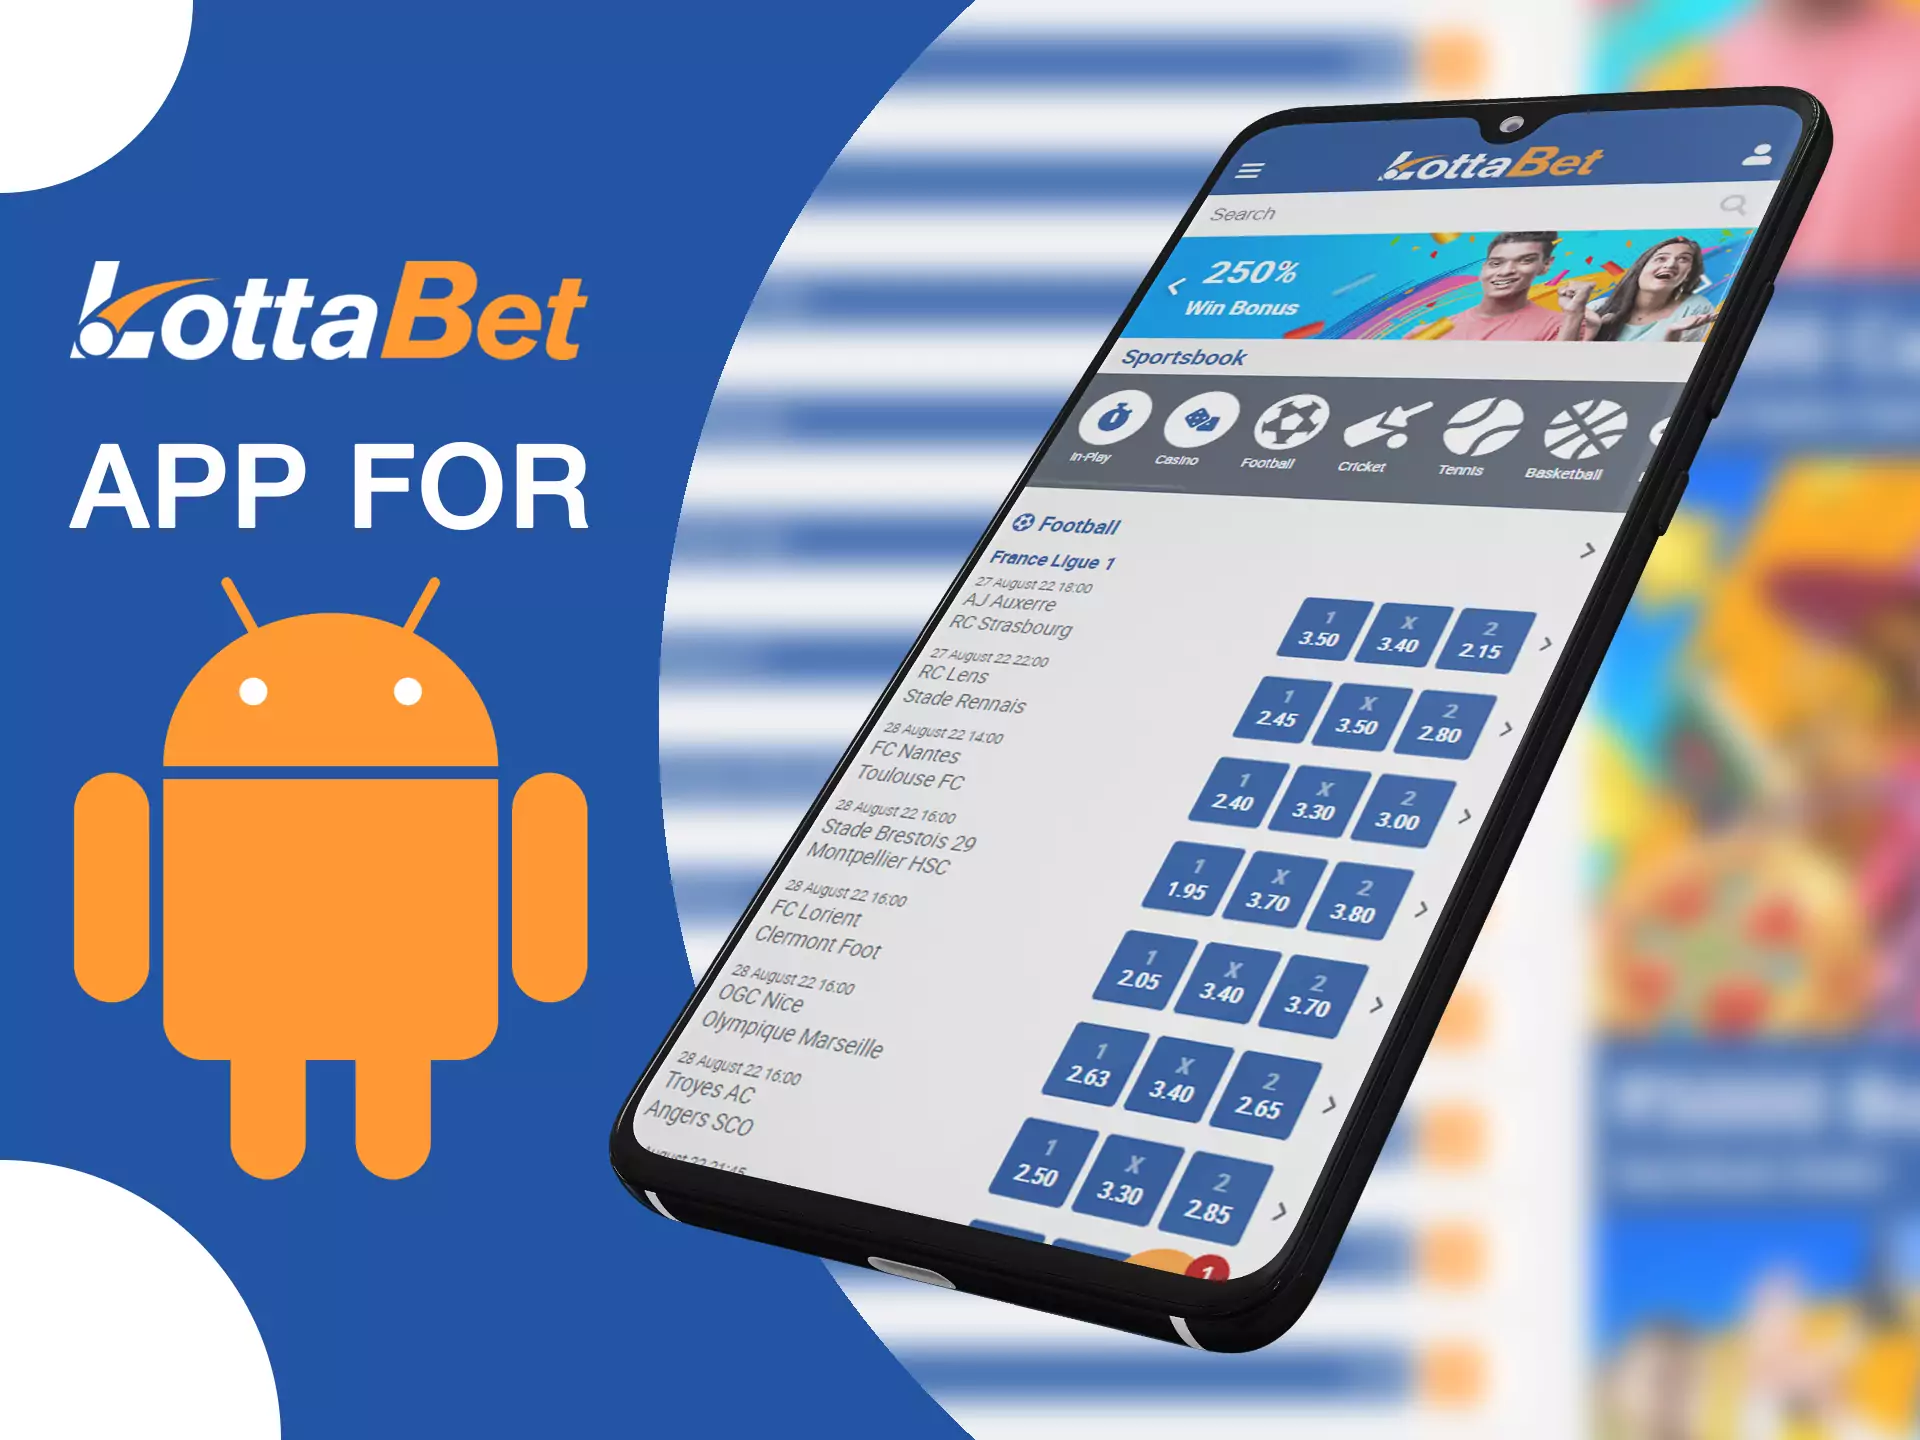 You can install LottaBet app on Android devices.